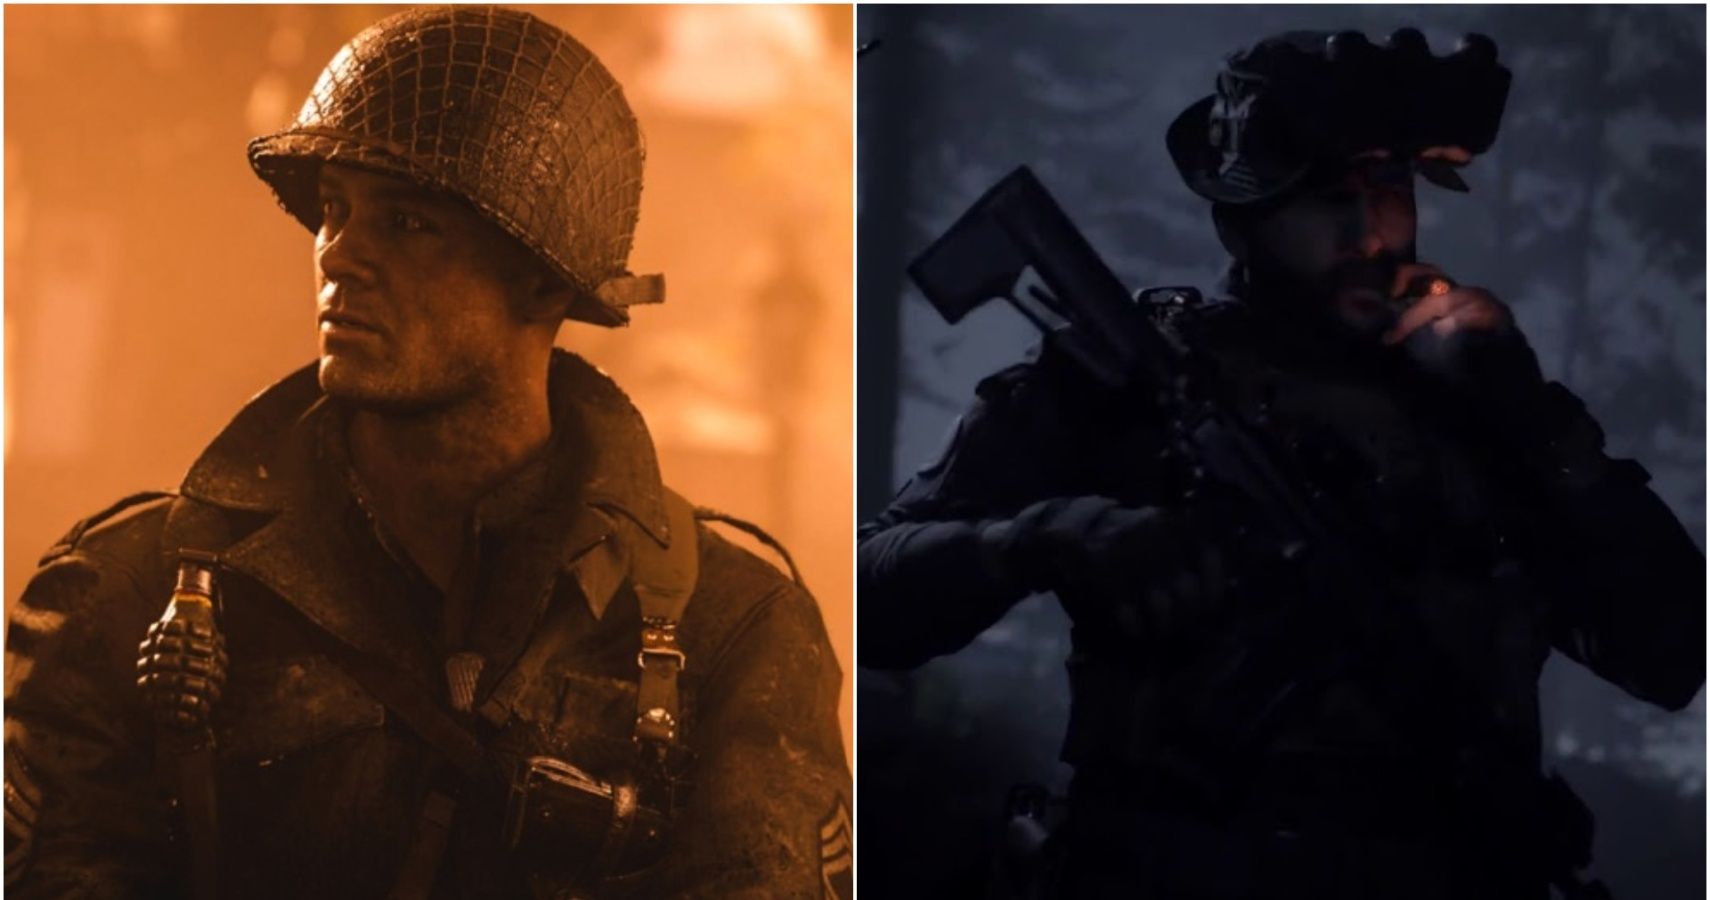 What's the Best World War 2 Call of Duty so far?